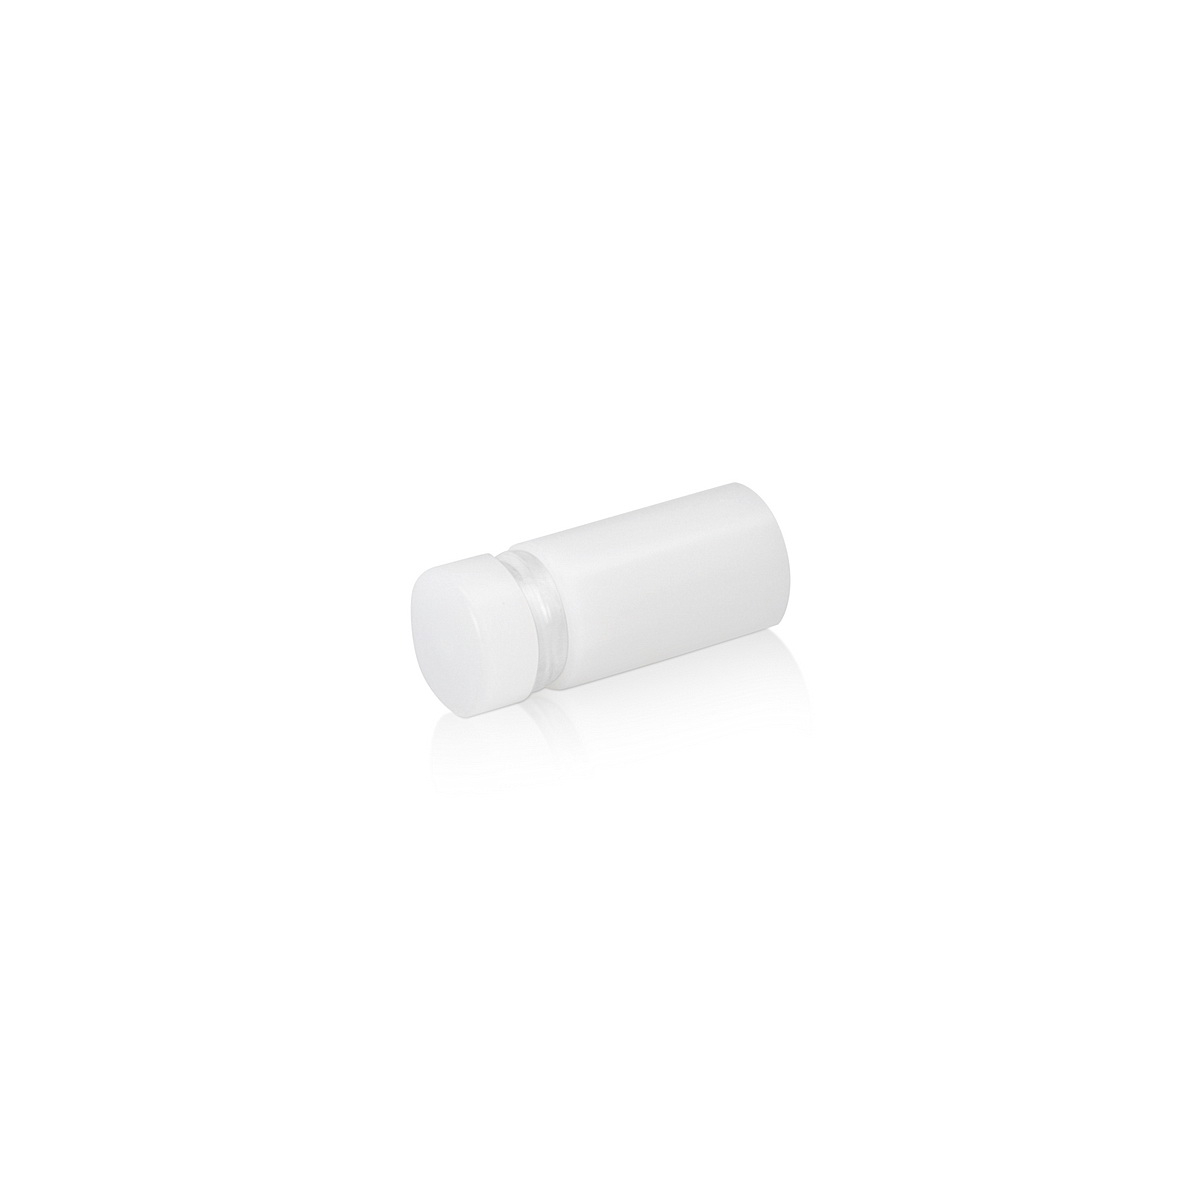 5/8'' Diameter X 1/2'' Barrel Length, White Acrylic Standoff. Easy Fasten Standoff (For Inside Use Only) Tamper Proof [Required Material Hole Size: 3/8'']